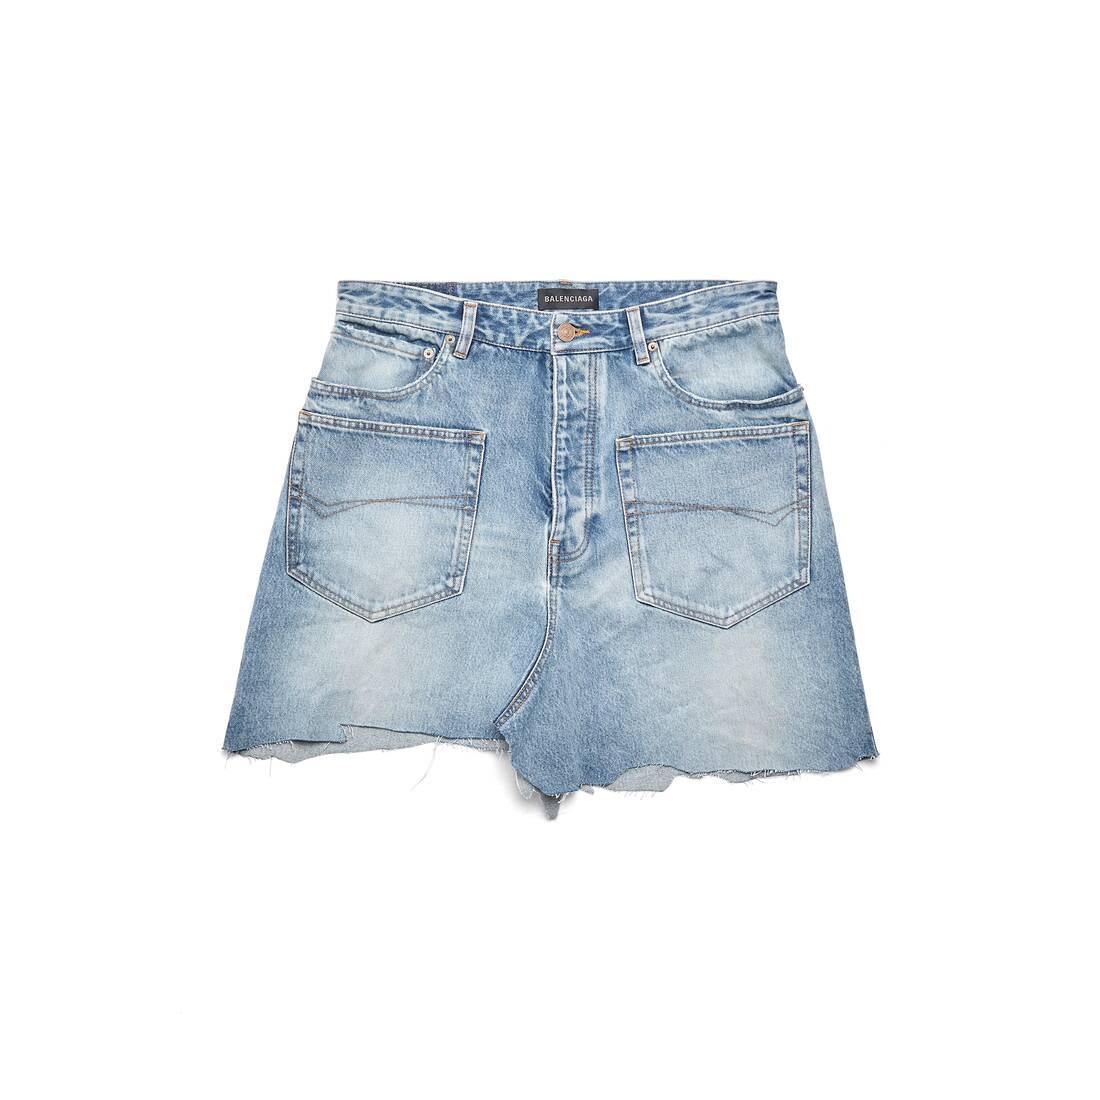 Women's Cut-up Patched Pocket Skirt in Blue - 1